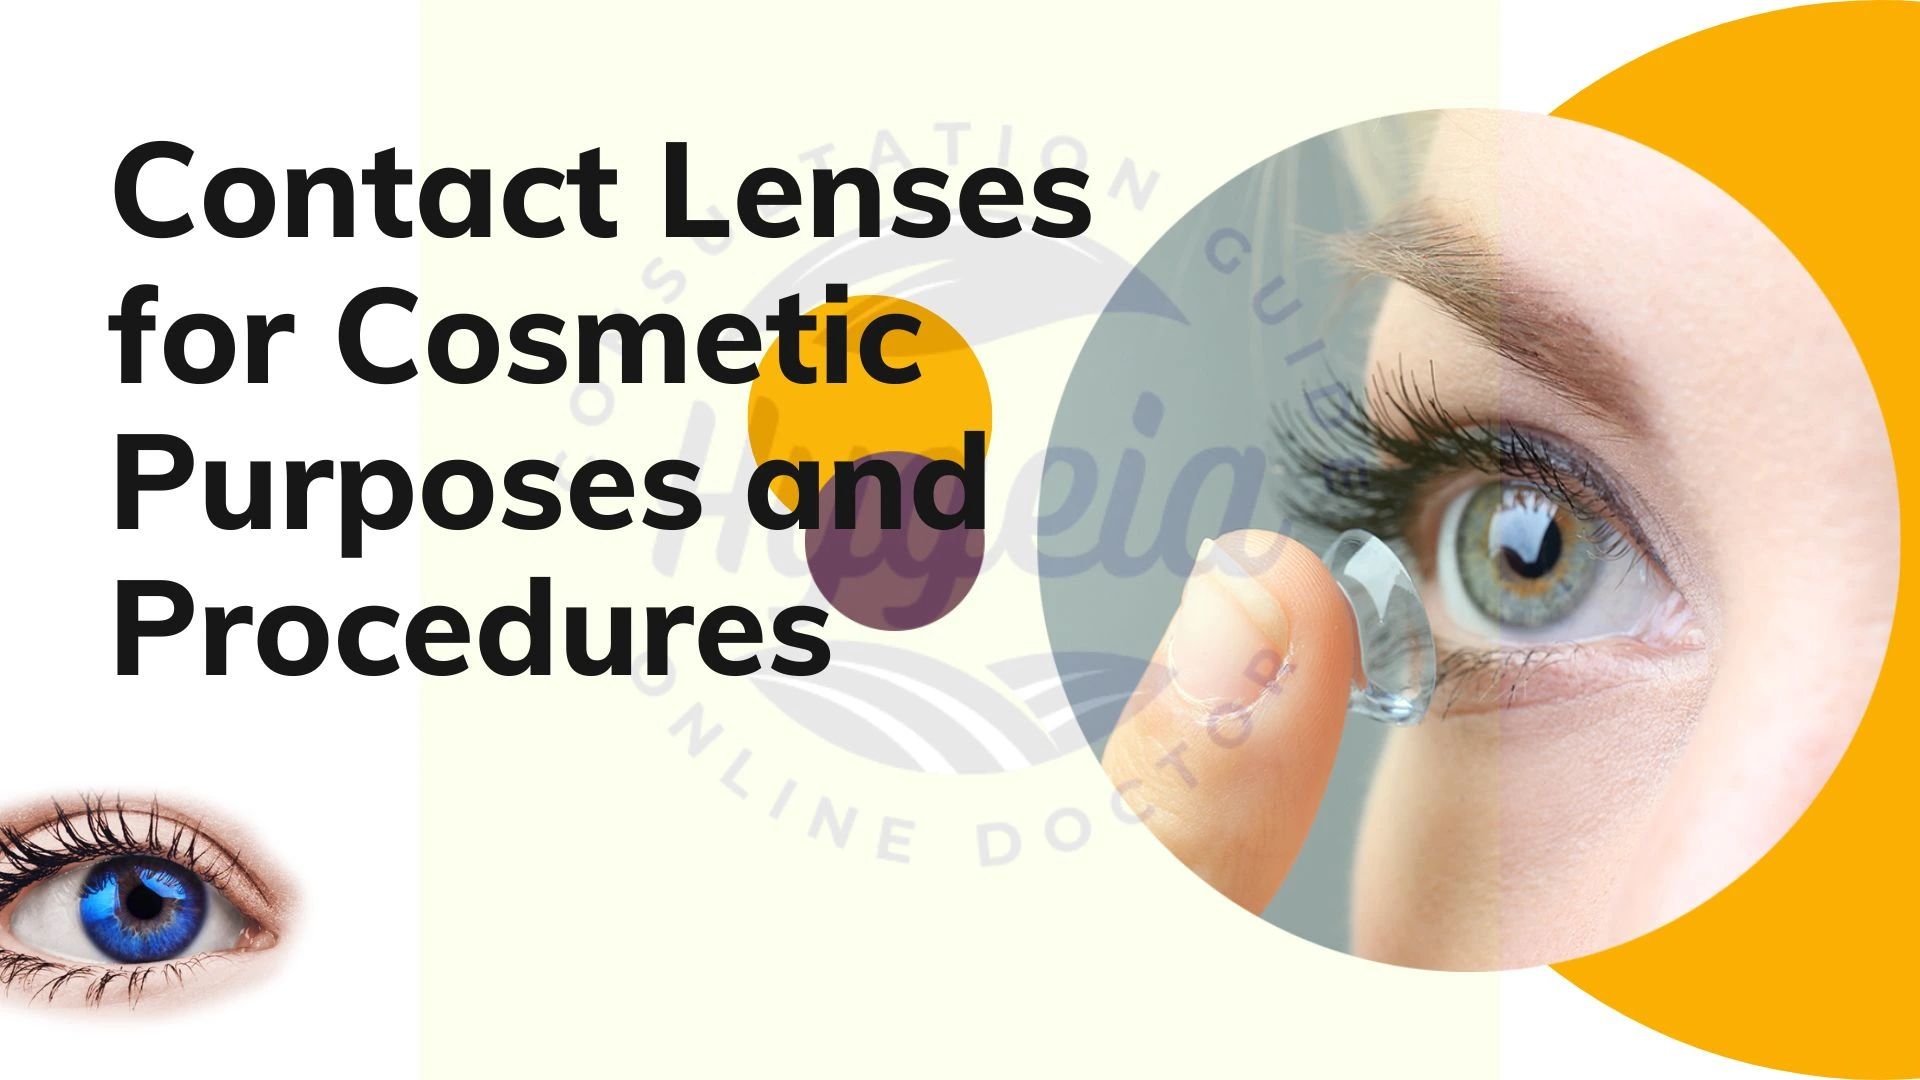 Contact Lenses for Cosmetic Purposes and Procedures